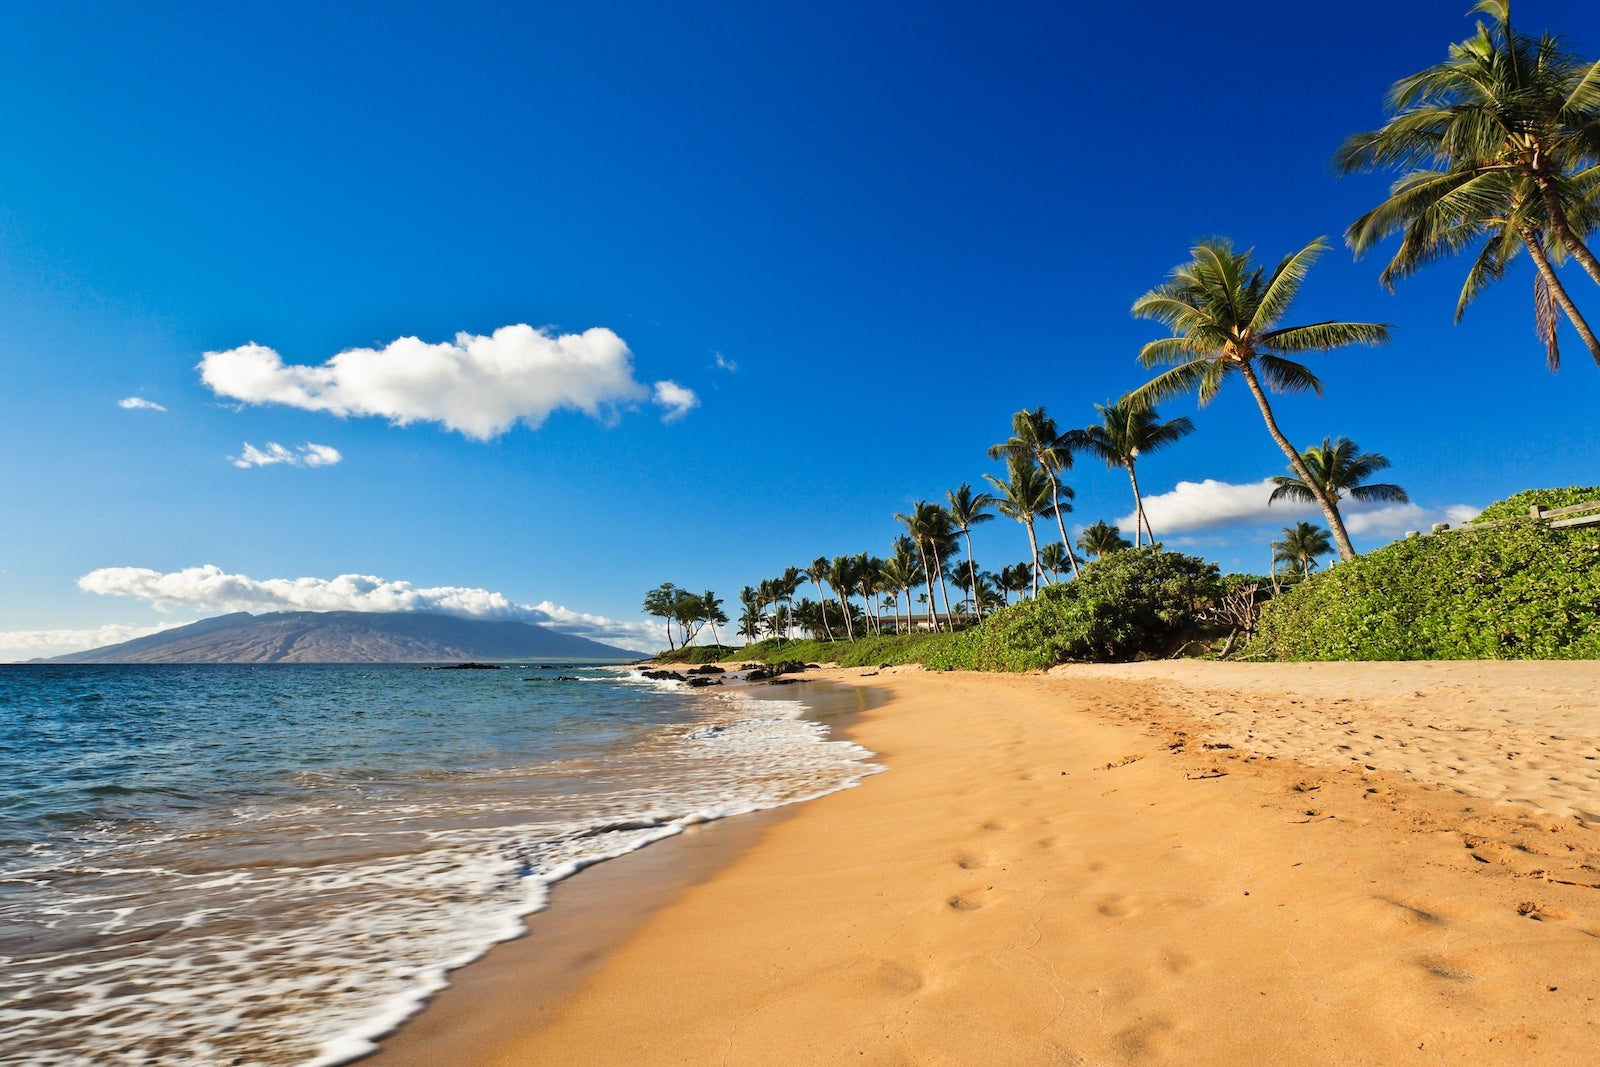 Deal alert: Get 30% off flights to Hawaii, the Bahamas and Belize – The Points Guy